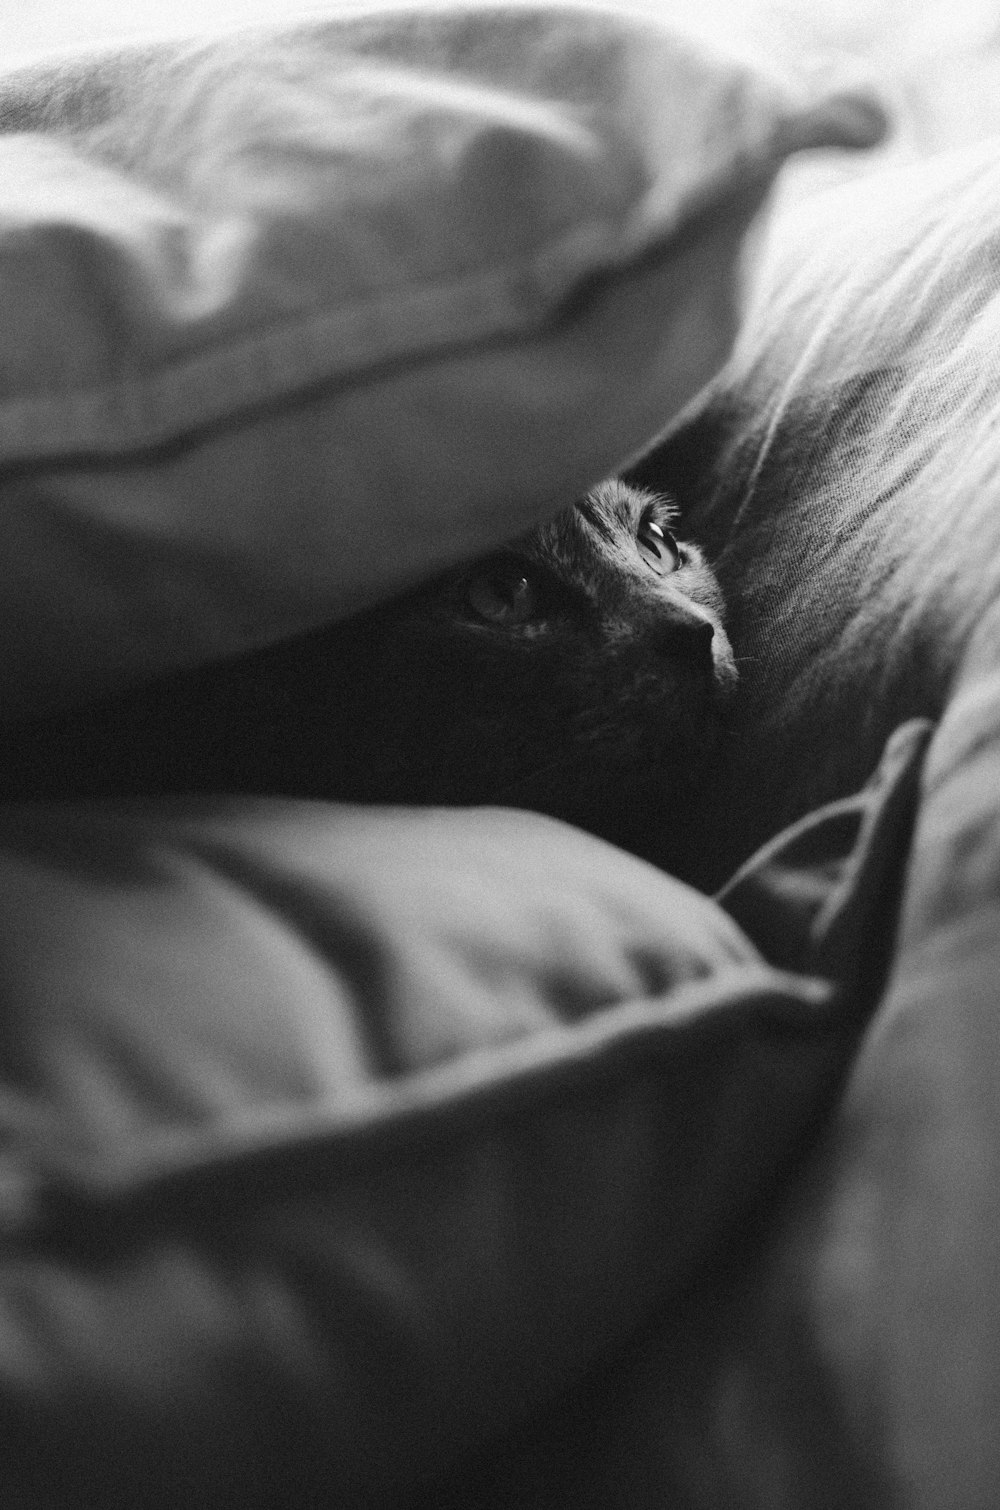 grayscale photography of cat under pillows